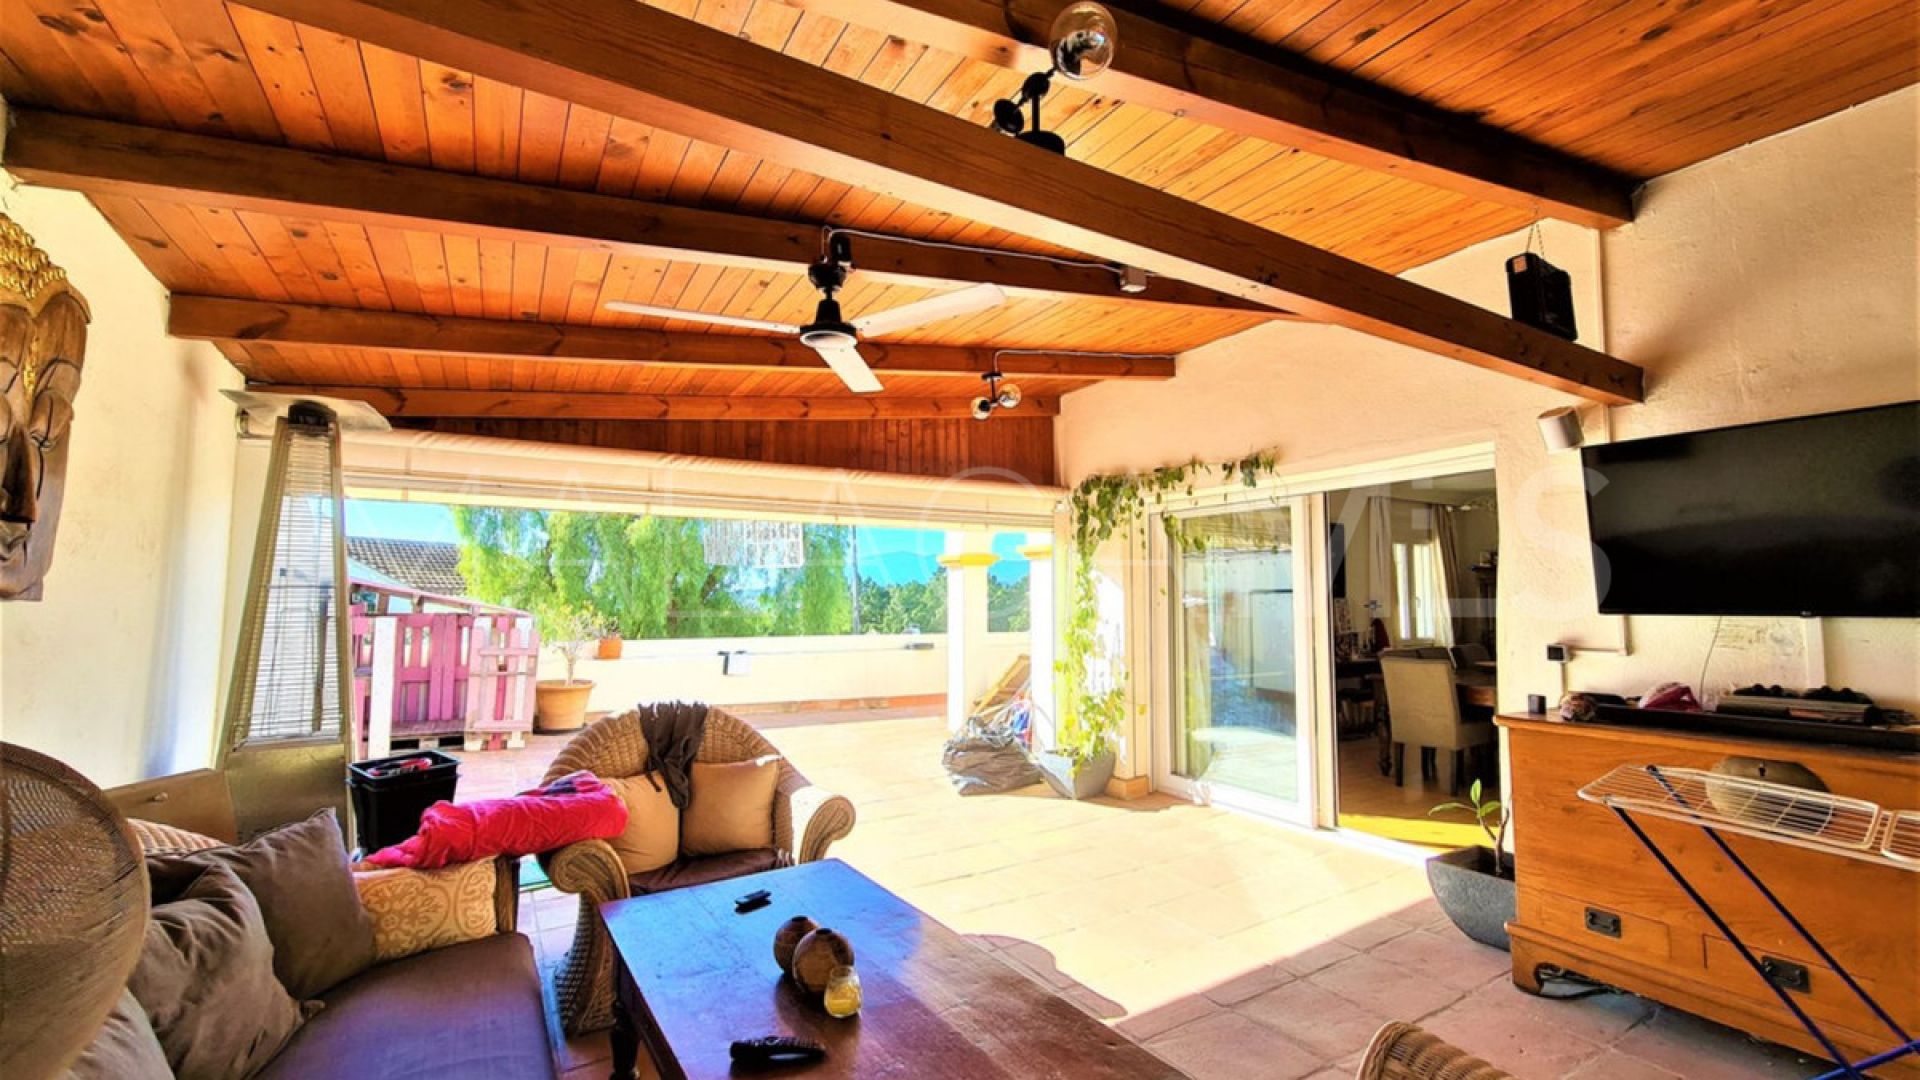 Villa for sale in Nueva Andalucia with 4 bedrooms